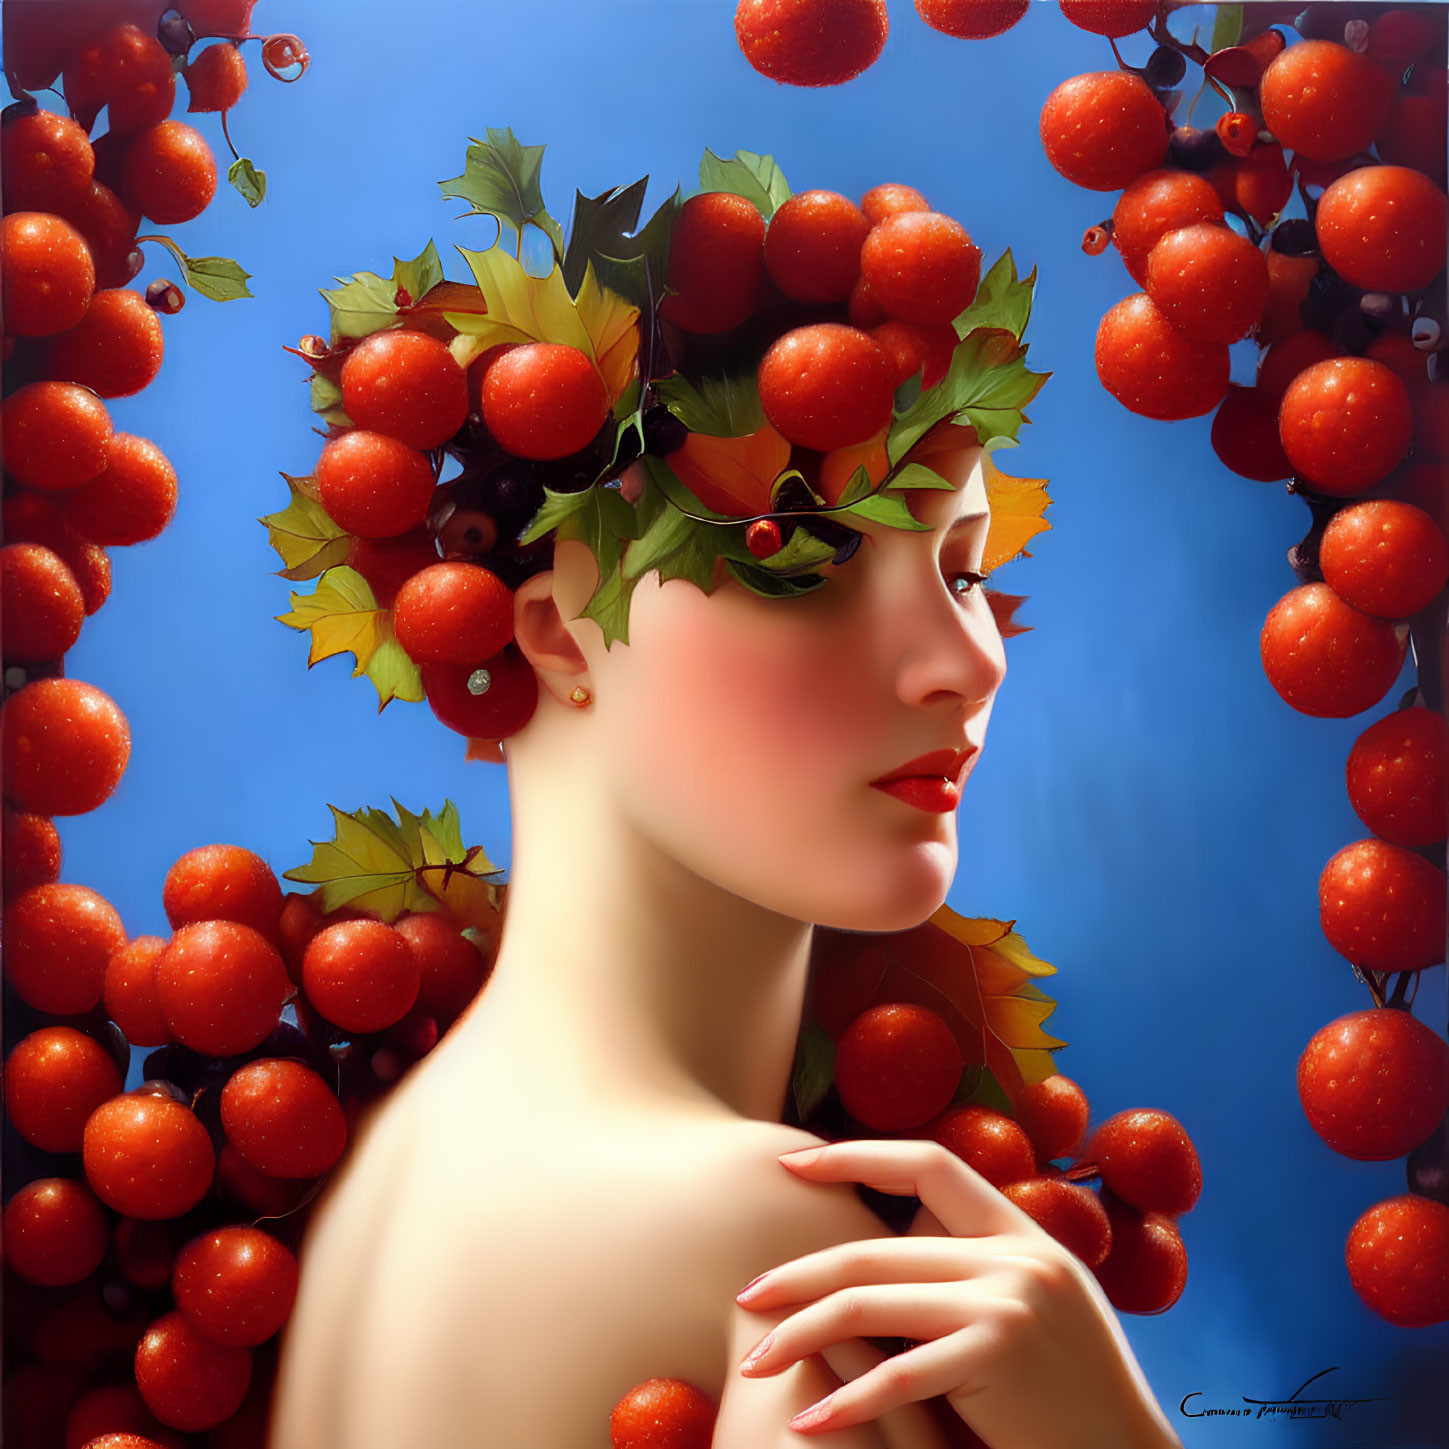 Portrait of woman with fair skin, red lipstick, green leaf wreath, and cherries on sky